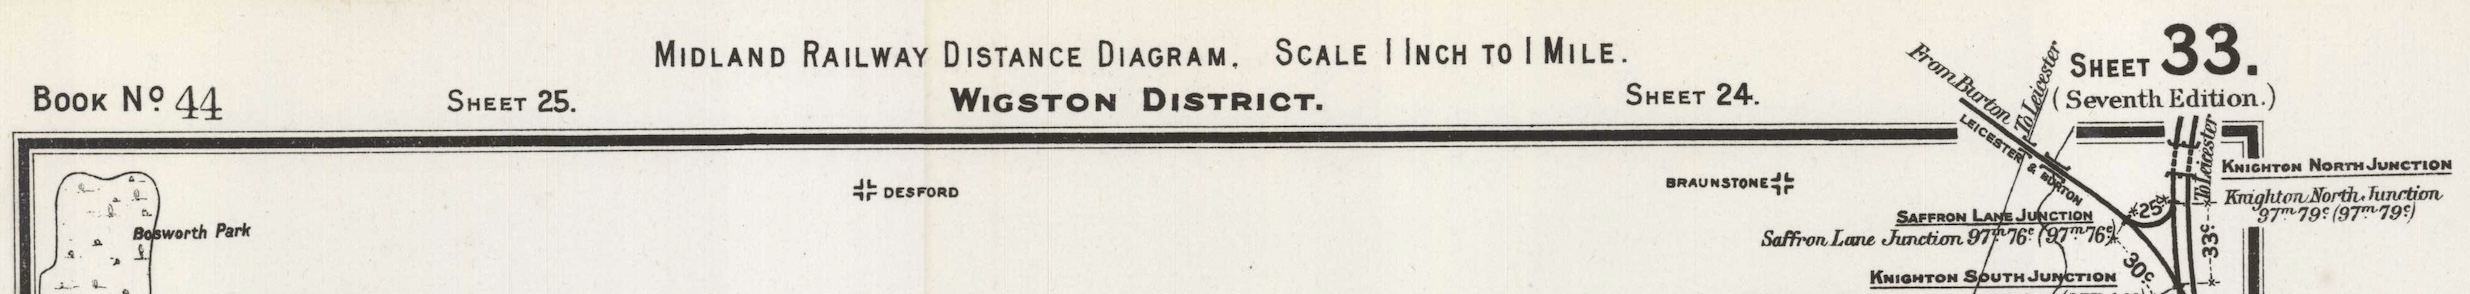 A break-section banner formed of a crop from the top of MIDLAND RAILWAY DISTANCE DIAGRAM, Book N° 44, Sheet 33, WiGSTON DISTRICT, Seventh Edition - used here as a banner to break up the sections